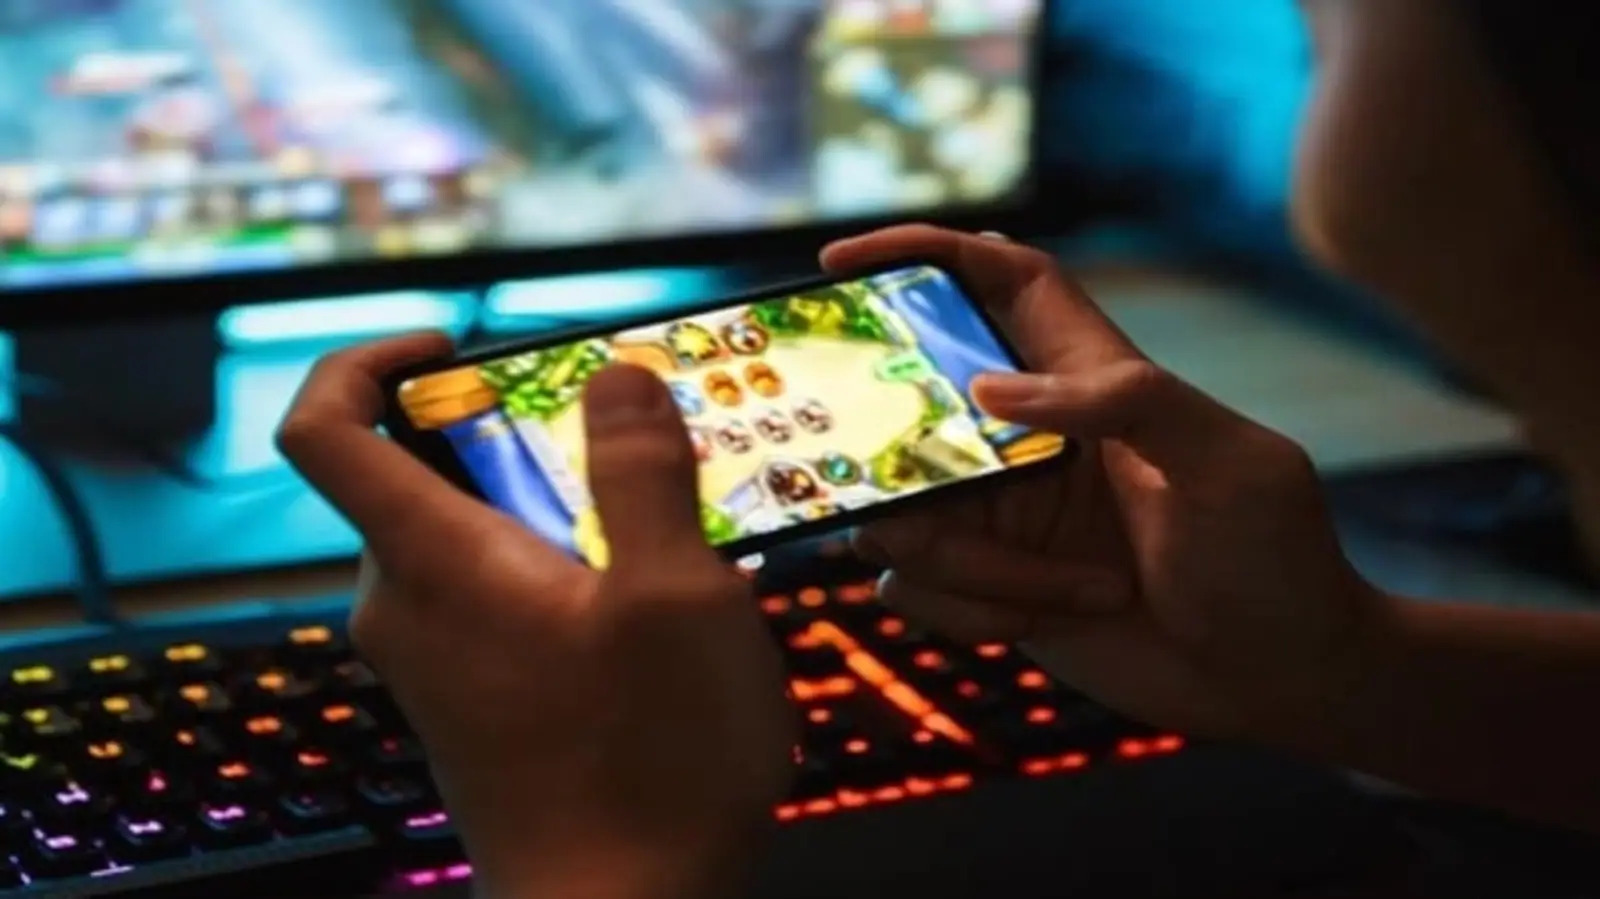 Majority wants GST on online gaming to be increased: Survey